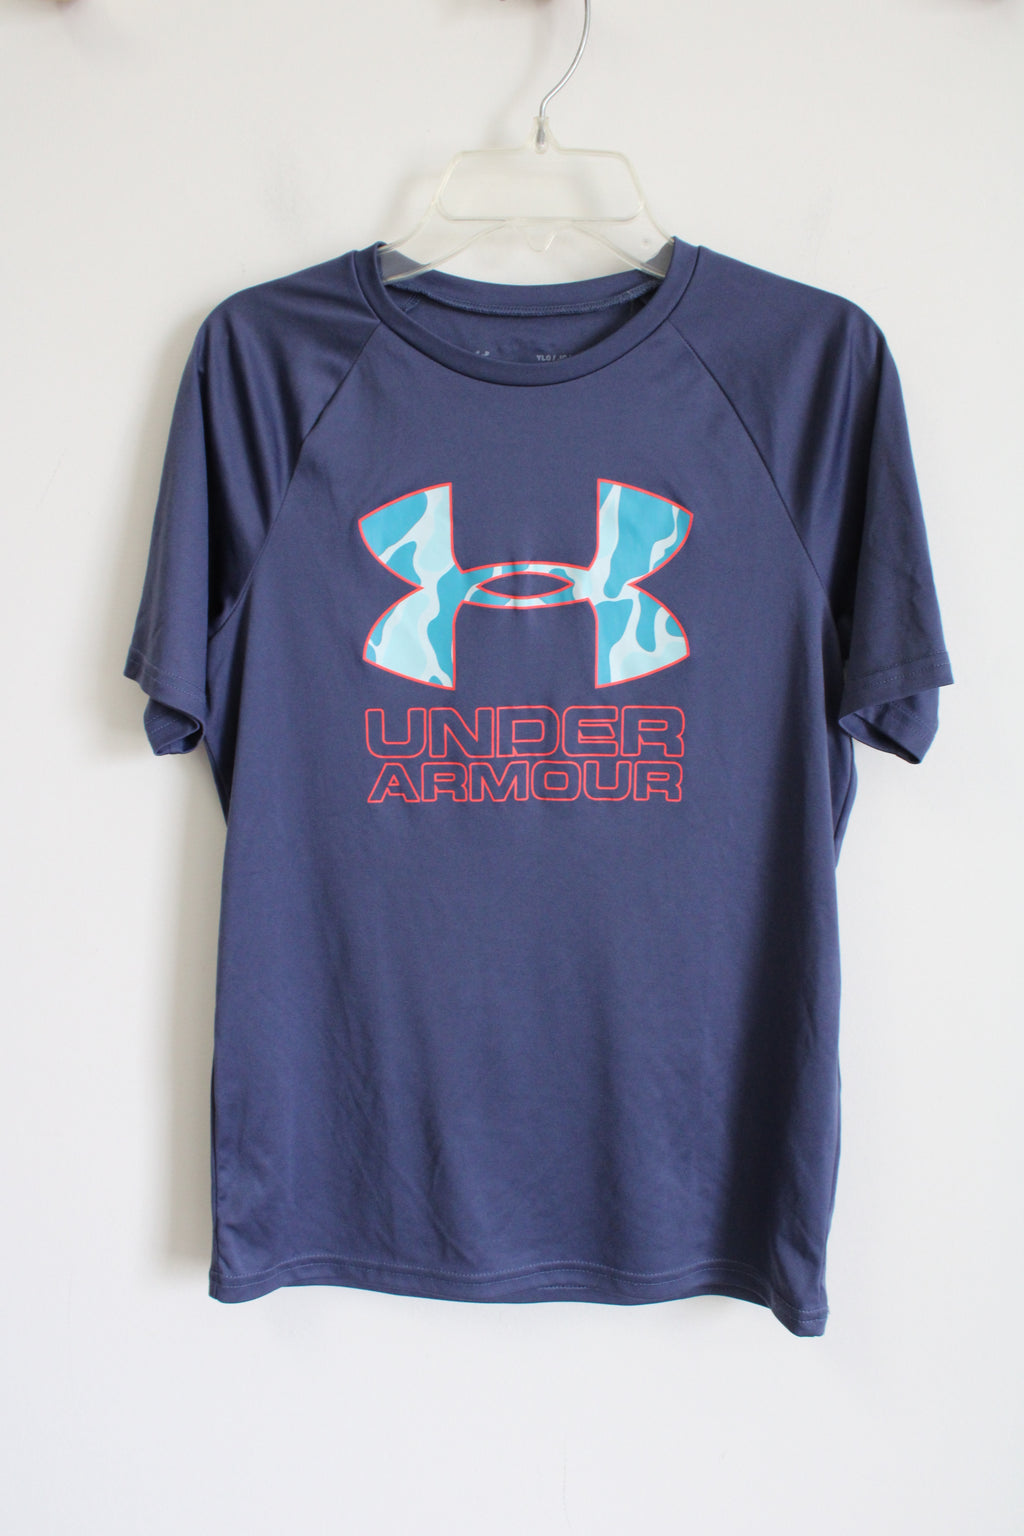 Under Armour Gray Blue Logo Shirt | Youth L (14/16)